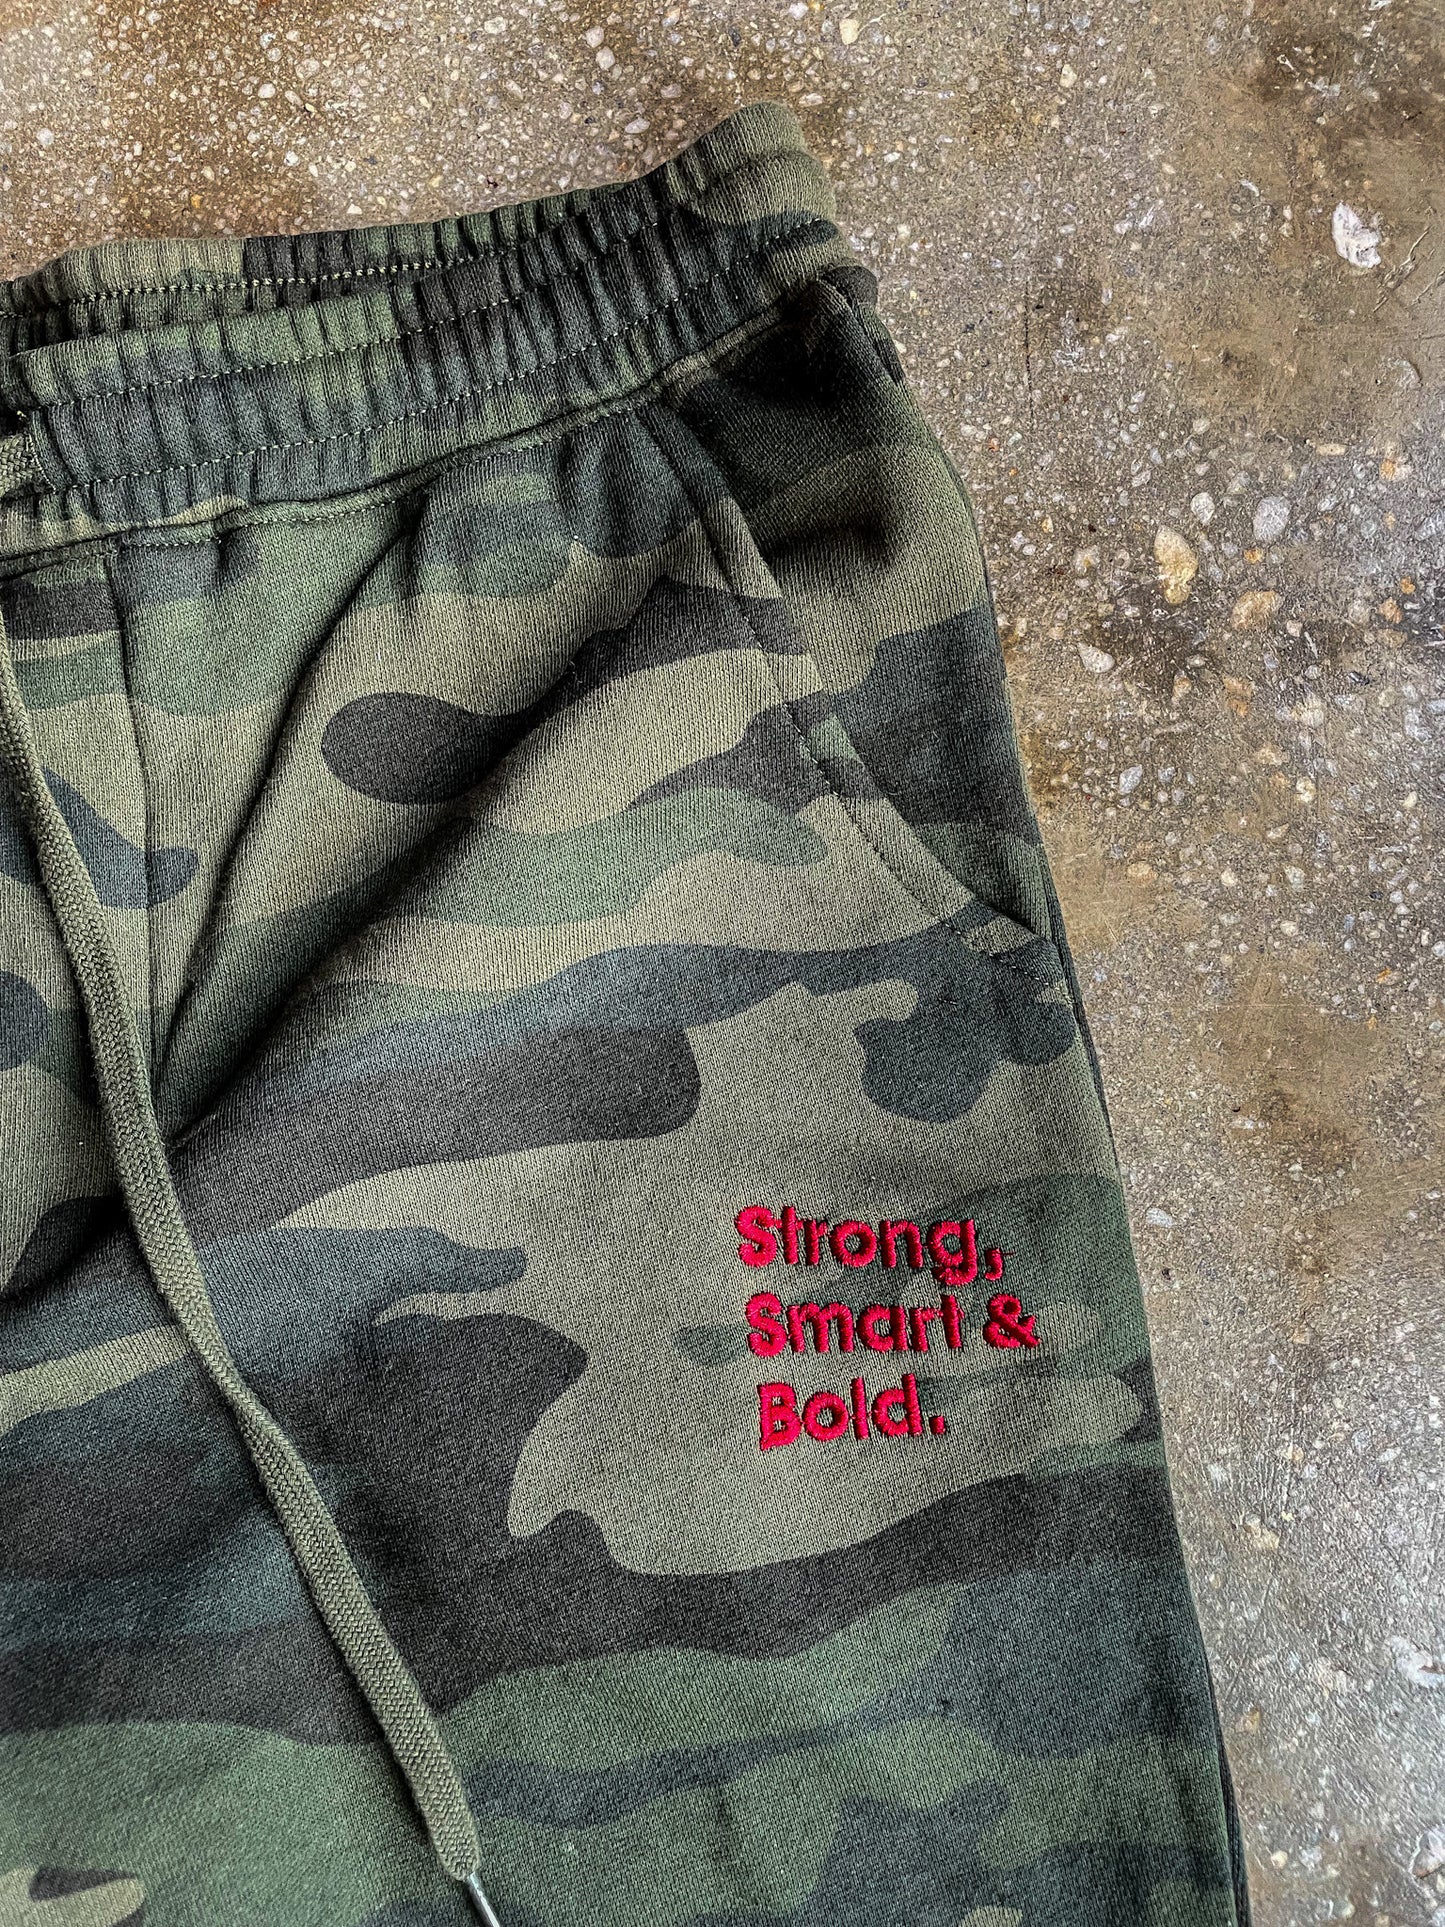 Strong, Smart & Bold Embroidered Adult/Unisex Sweatpants